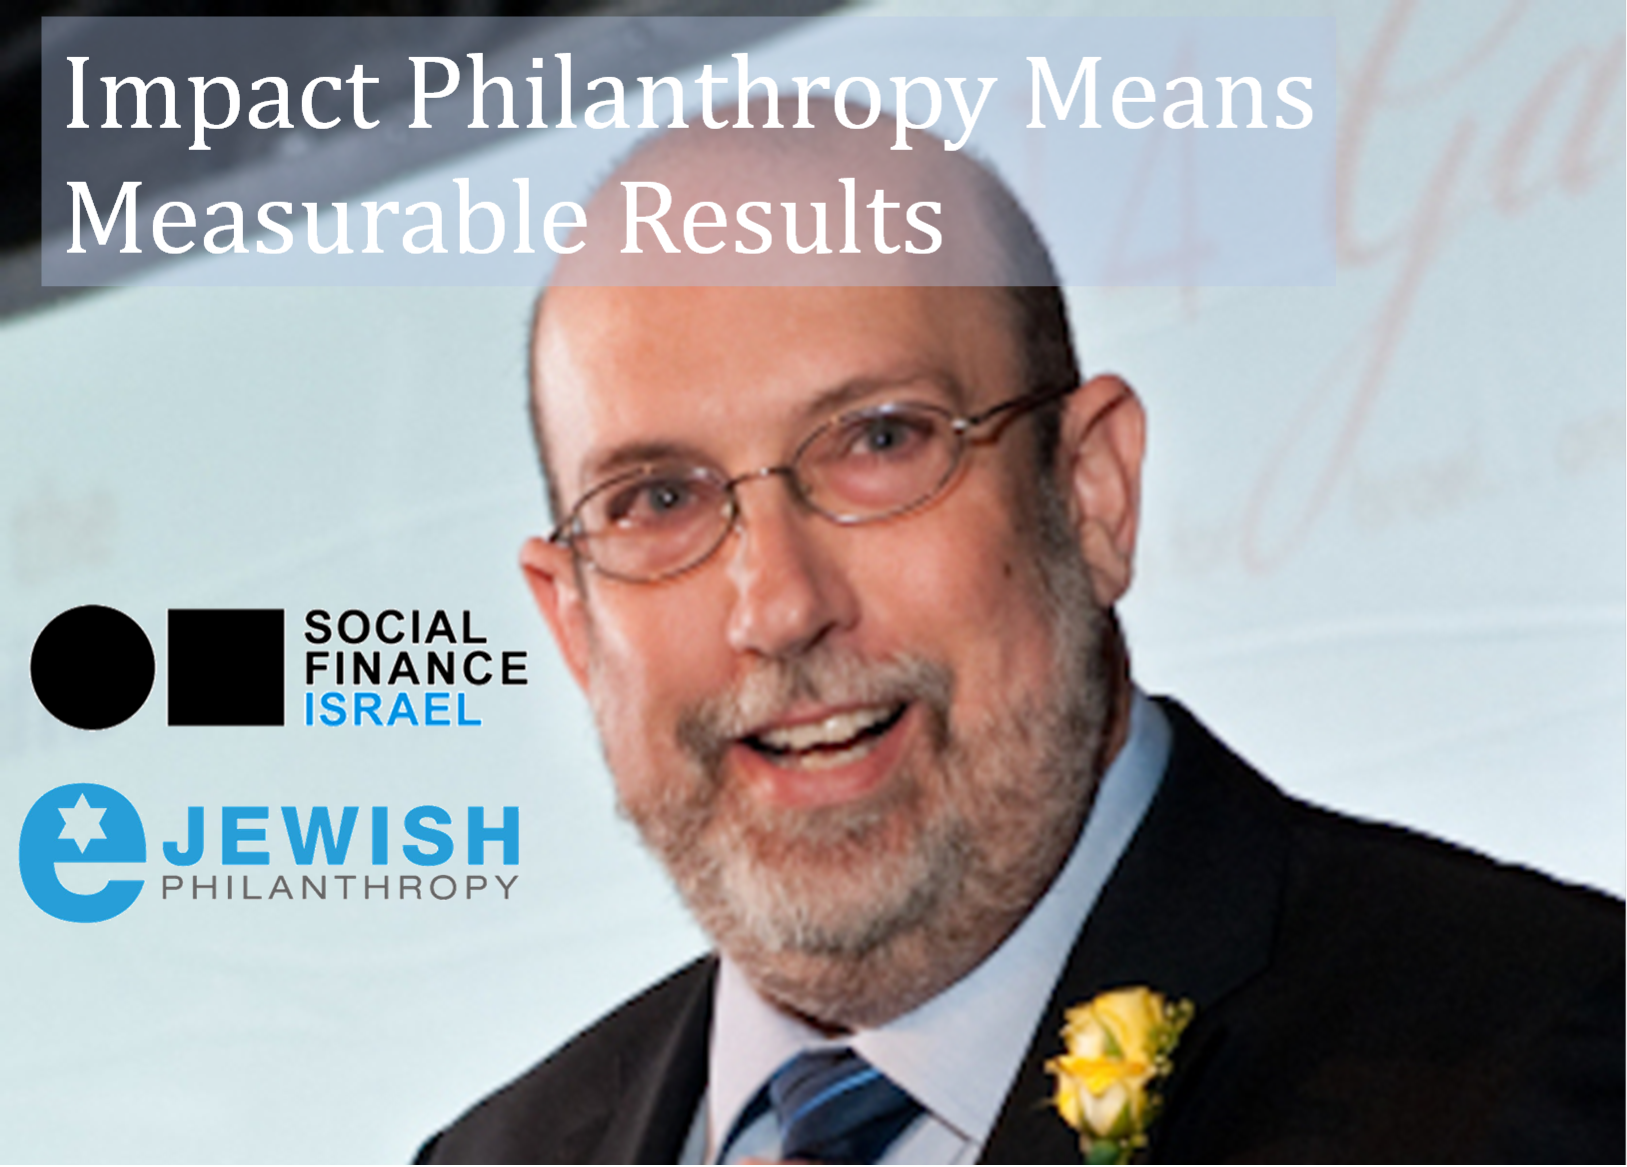 Impact Philanthropy Means Measurable Results